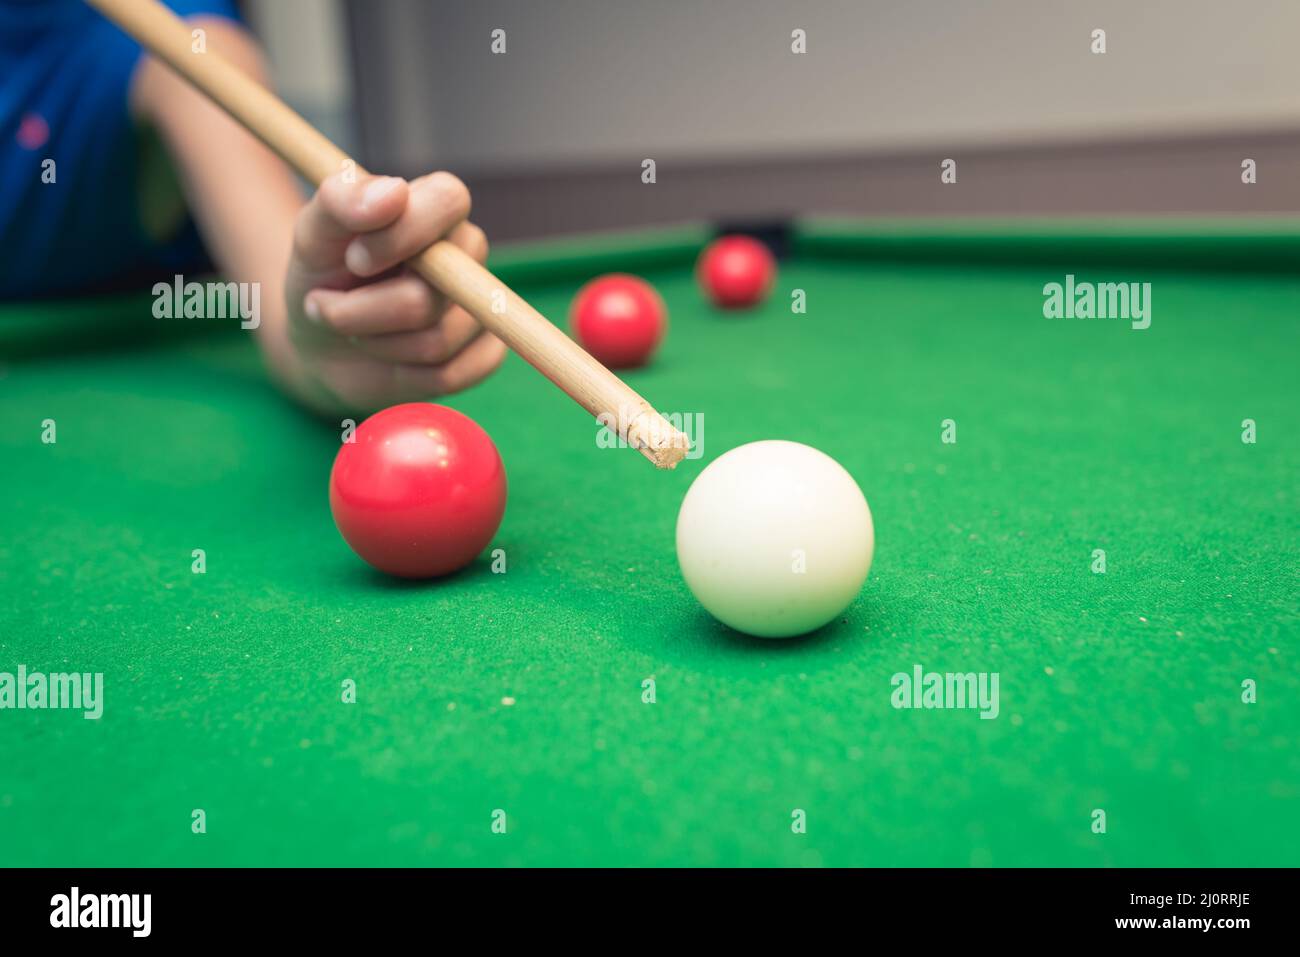 Cute boy in blue t shirt plays billiard or pool in club. Boy with billiard cue strikes the ball on table. Active Leisure, sport, hobby concept Stock Photo